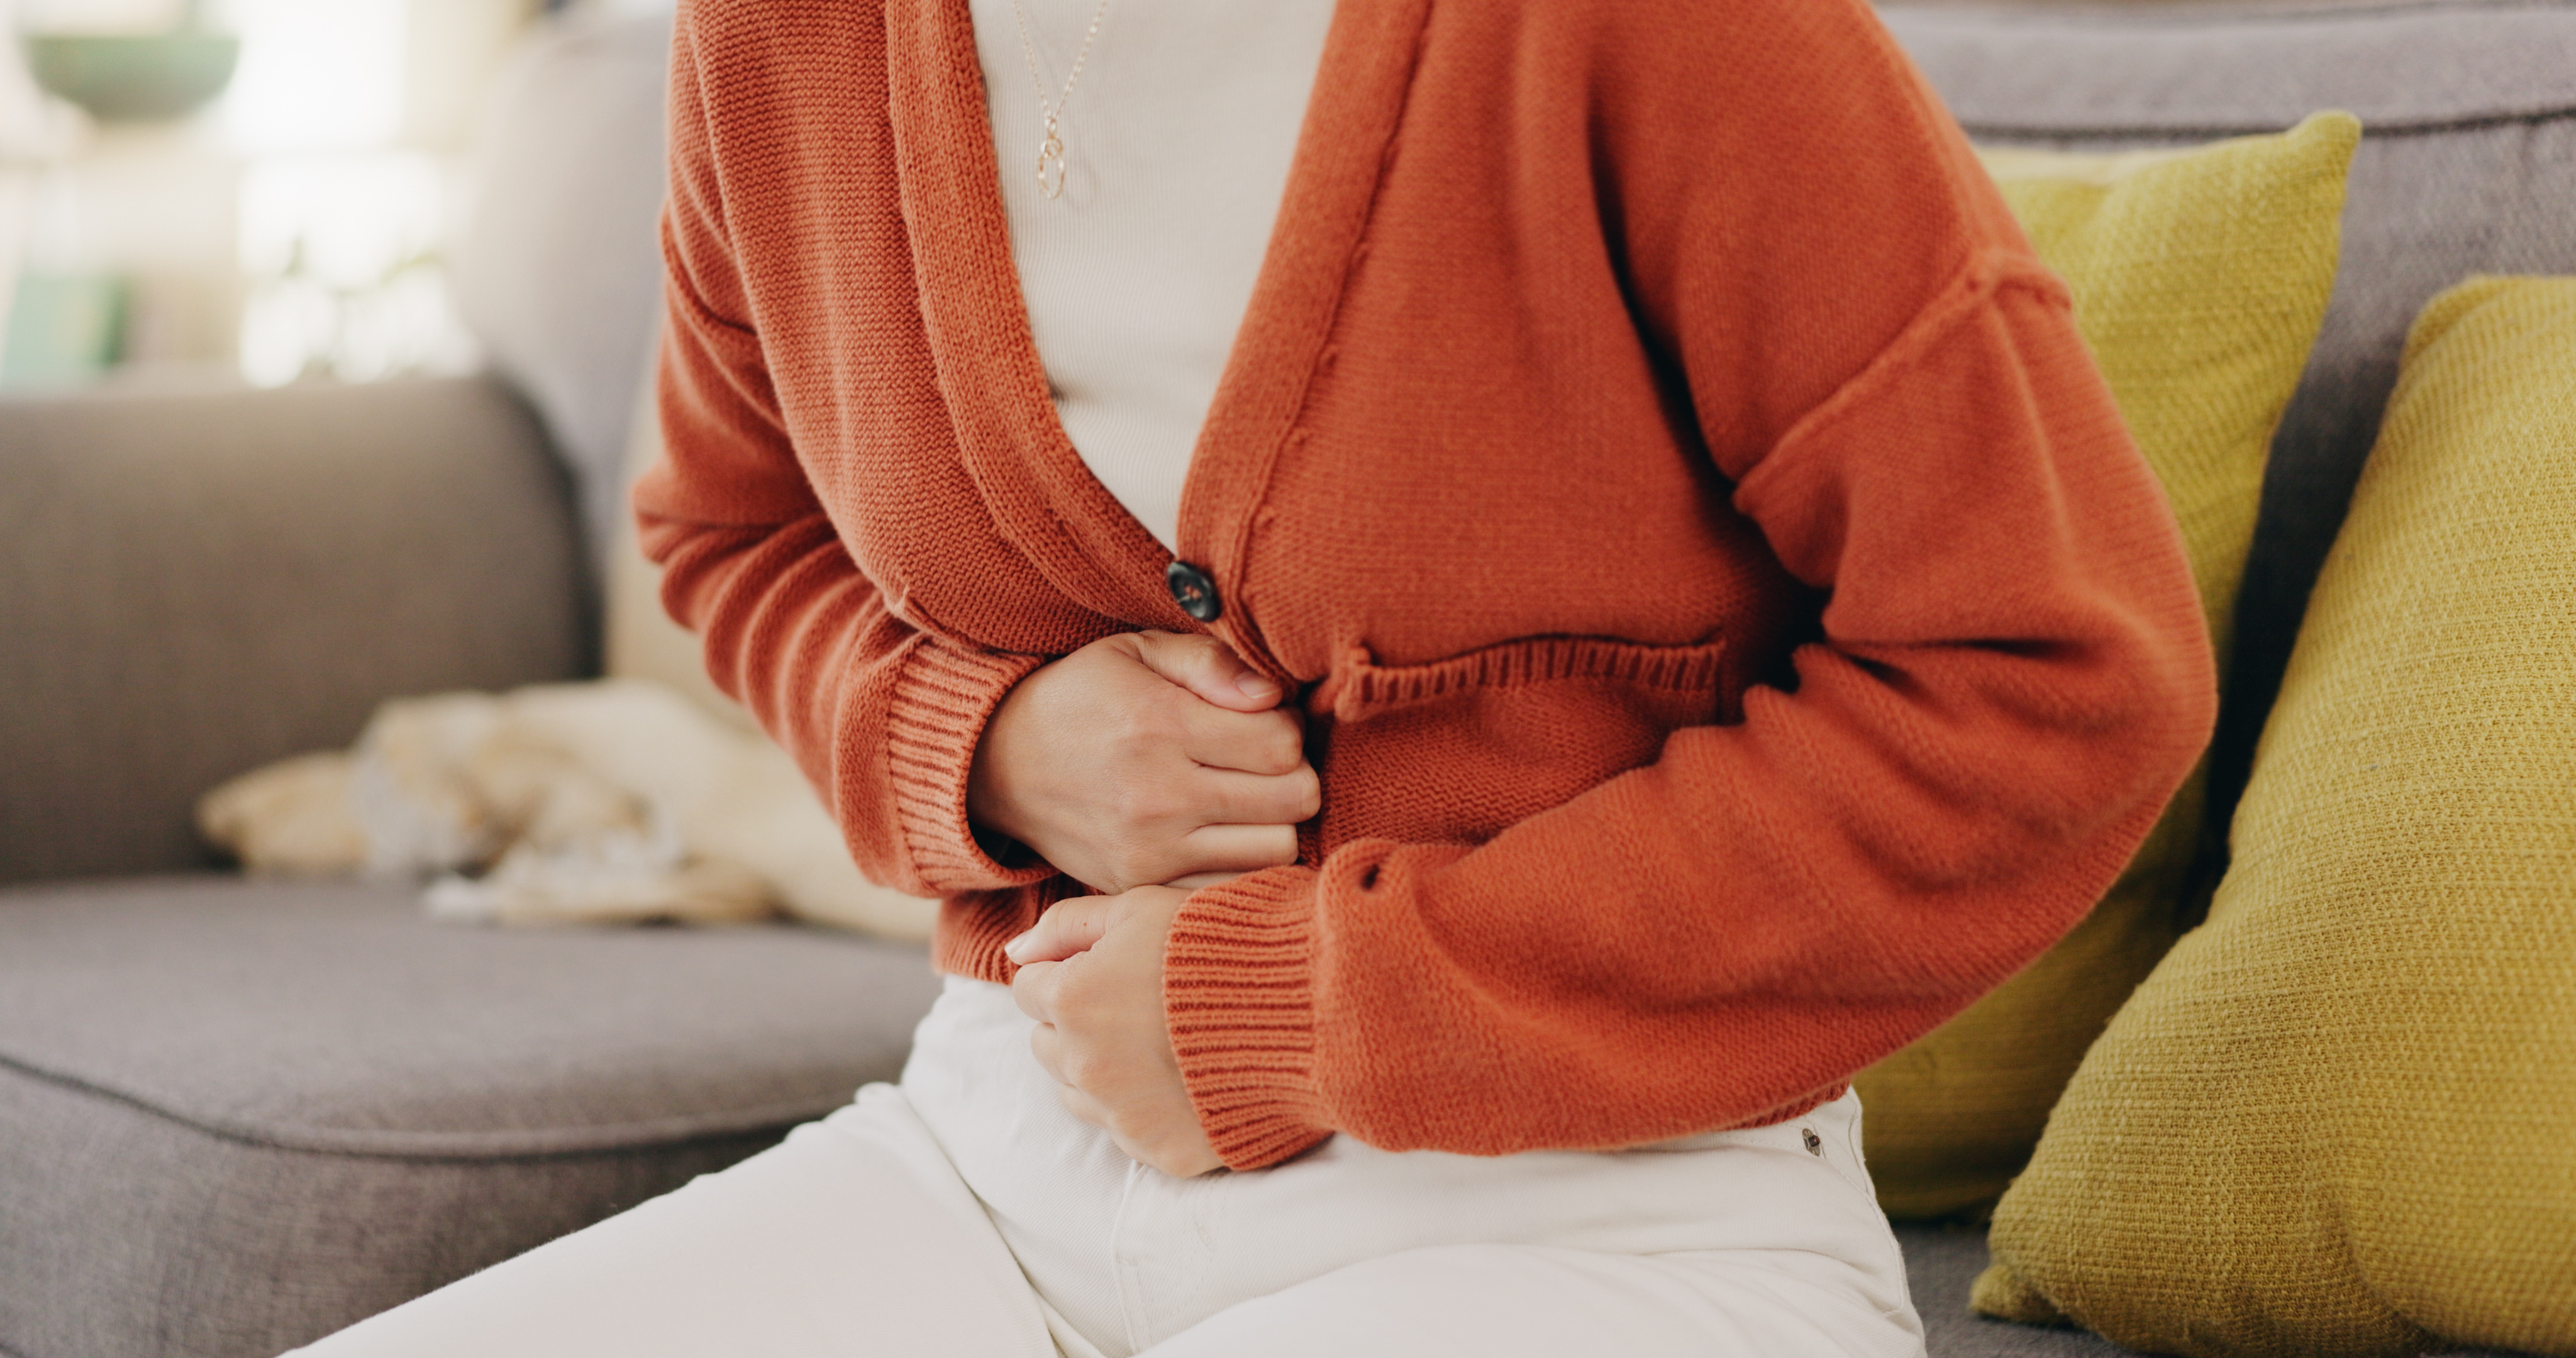 A woman experiencing stomach pain - learn how you can find relief with Vida-Flo's IV hydration treatment for gastrointestinal diseases in Broadway, TN.